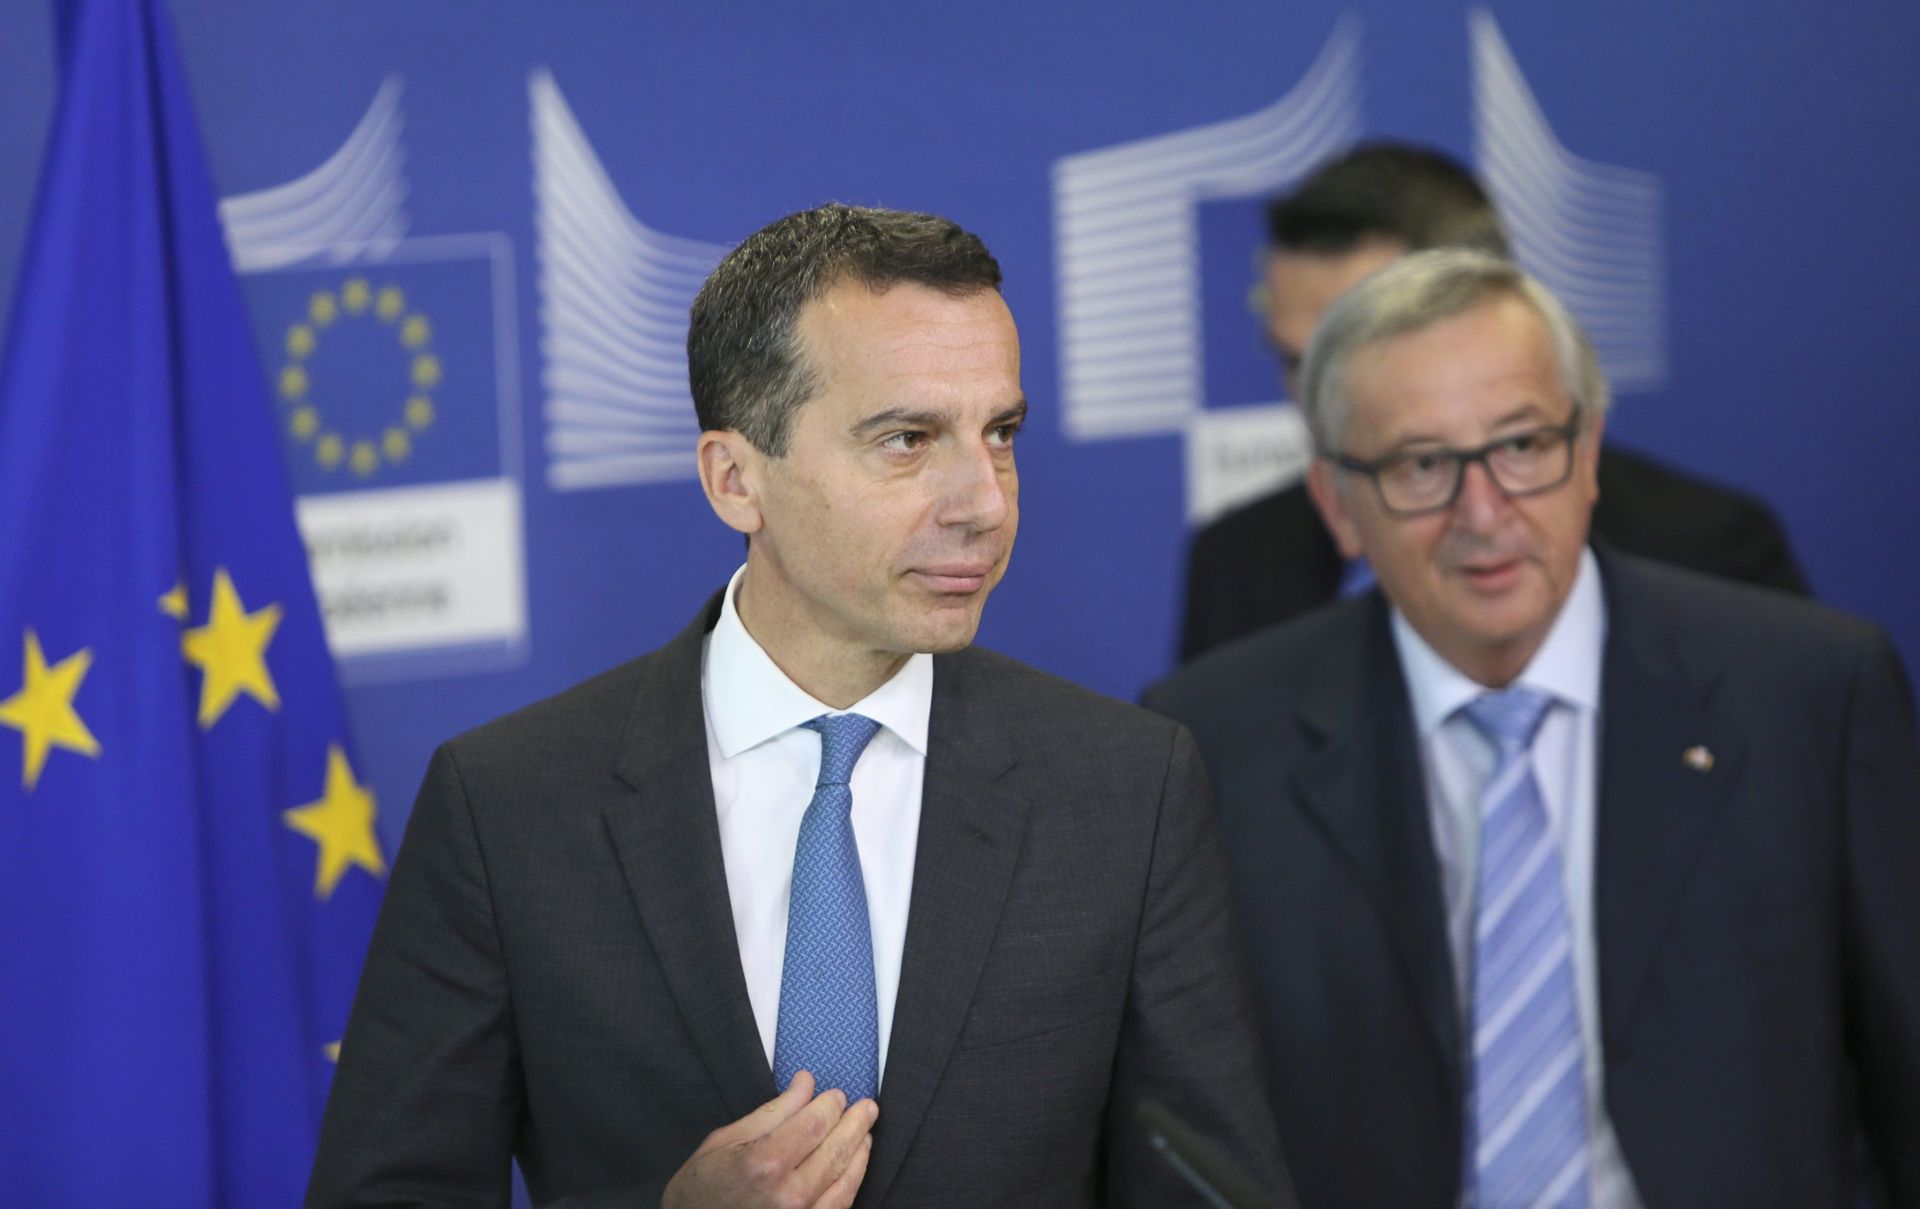 epa05383331 European Commission Jean-Claude Juncker (R) welcomes Austrian Chancellor Christian Kern (L) for a press briefing after a meeting in Brussels, Belgium, 22 June 2016. The meeting marked the first official visit of new Austrian Chancellor in Brussels.  EPA/OLIVIER HOSLET